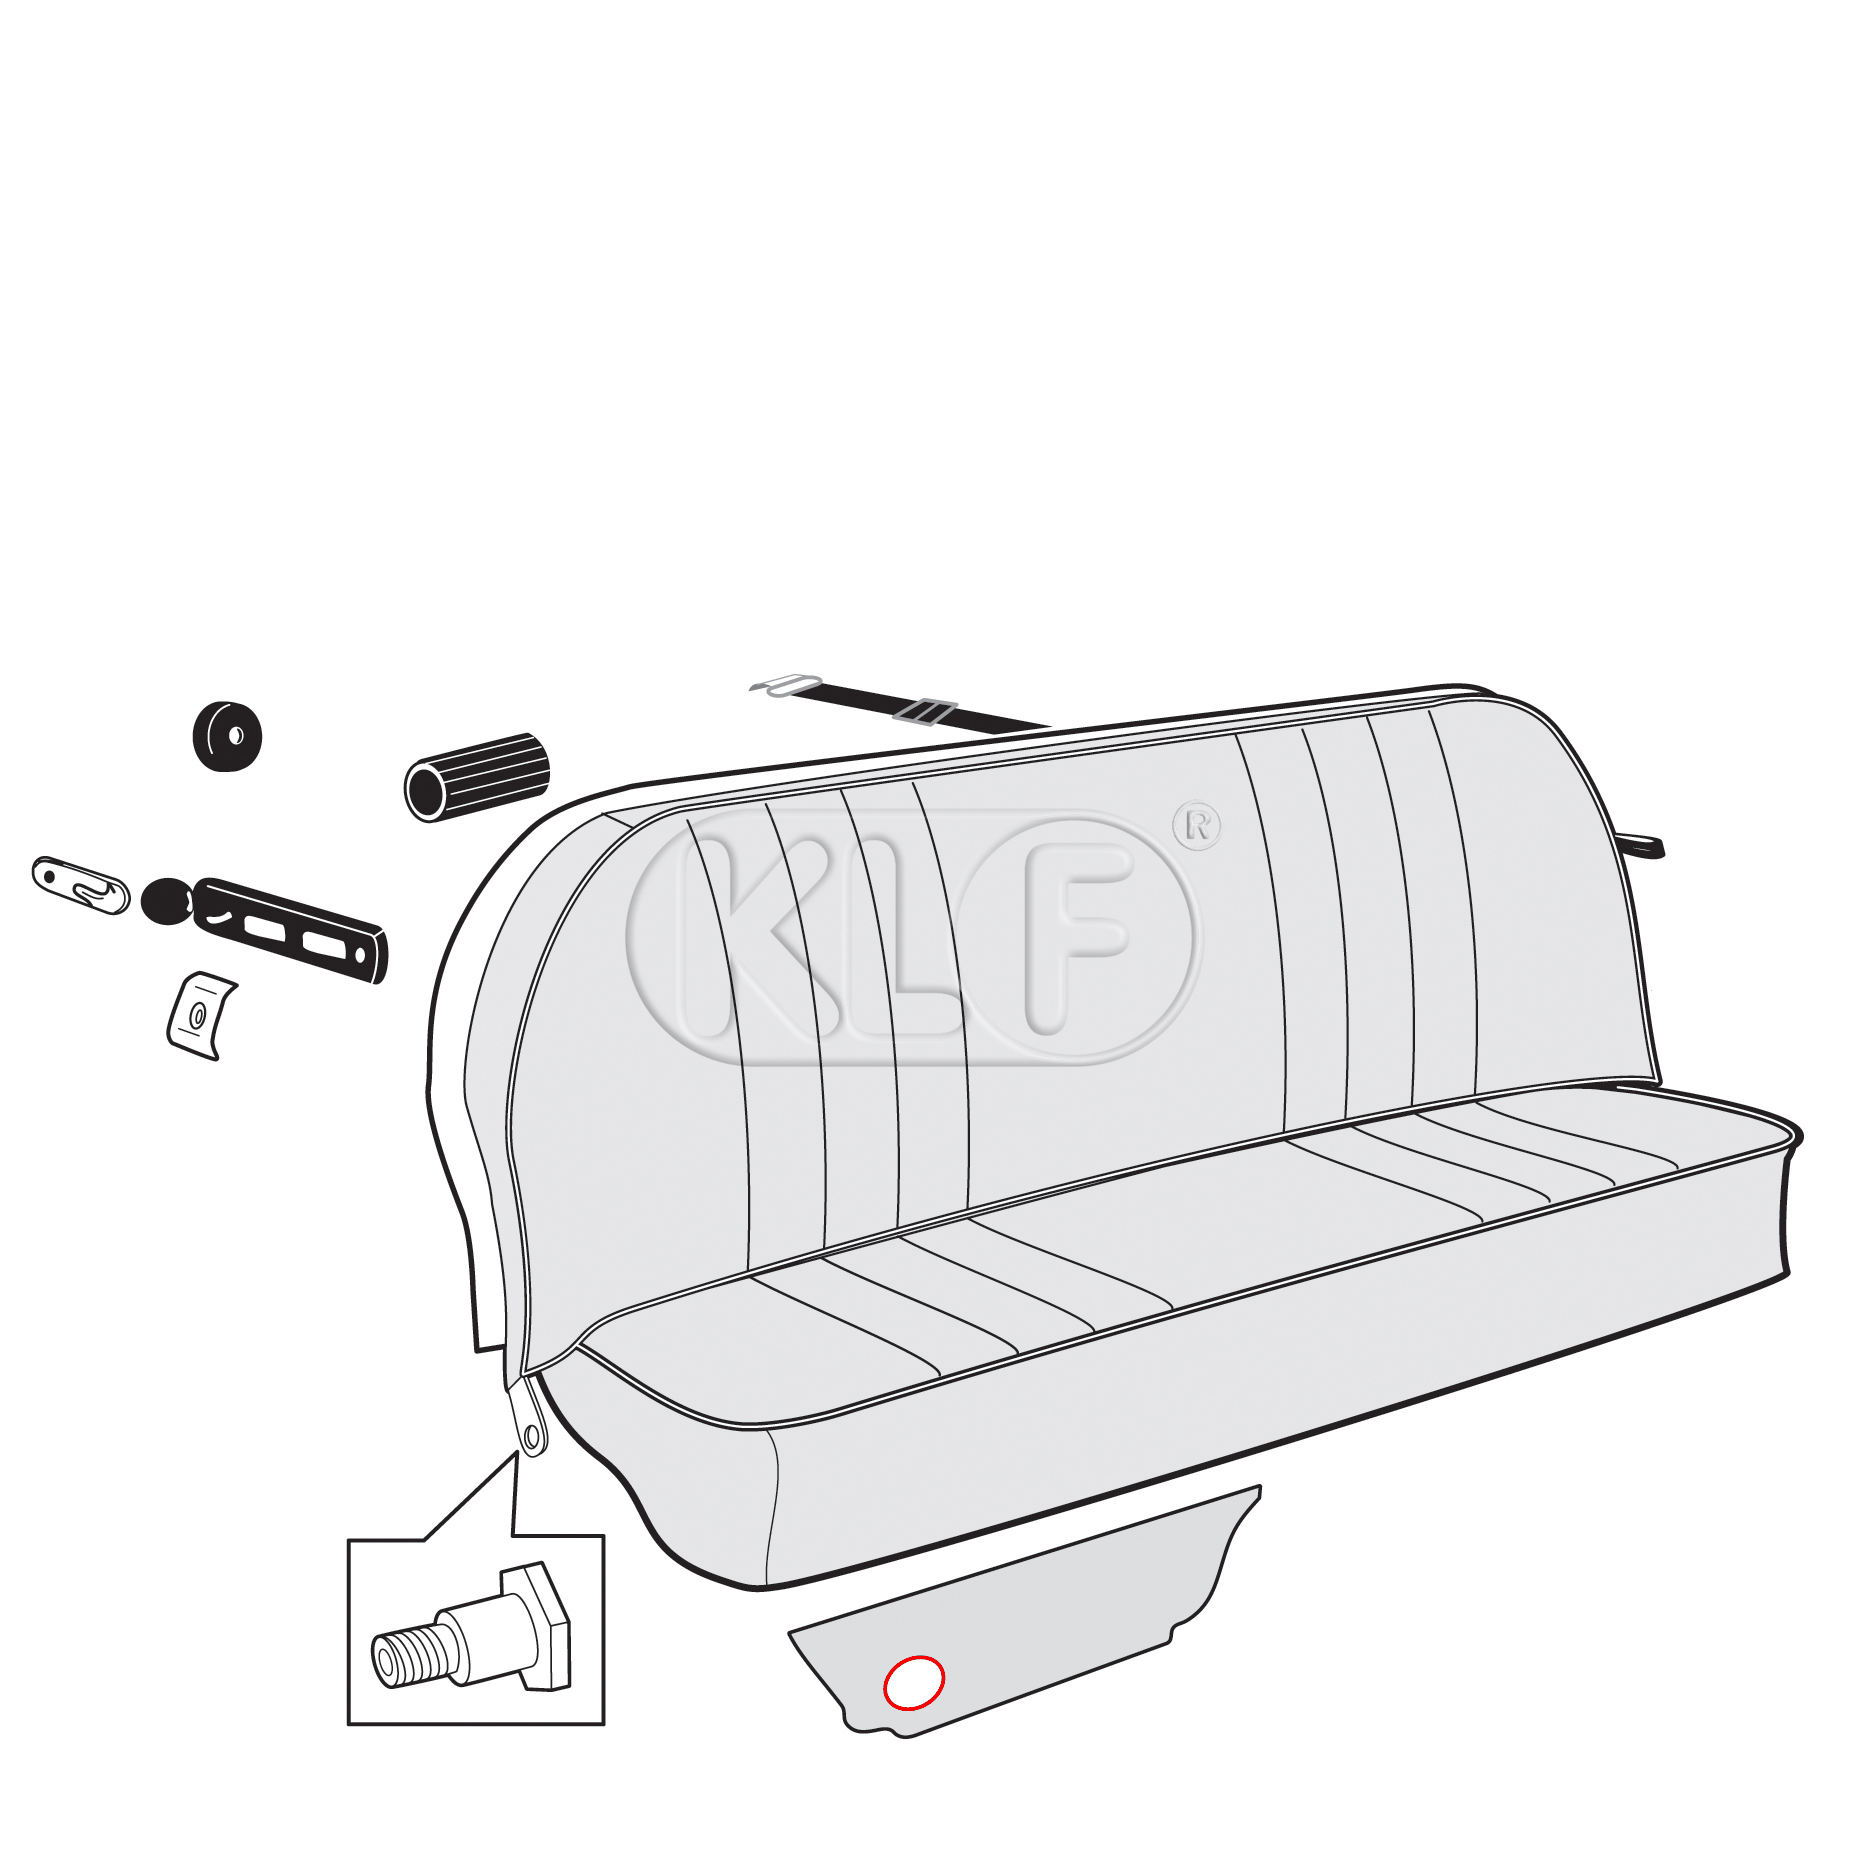 Cover for kick panel heater outlet, year 11/62 on (starts with chassis n. 5 199 980)